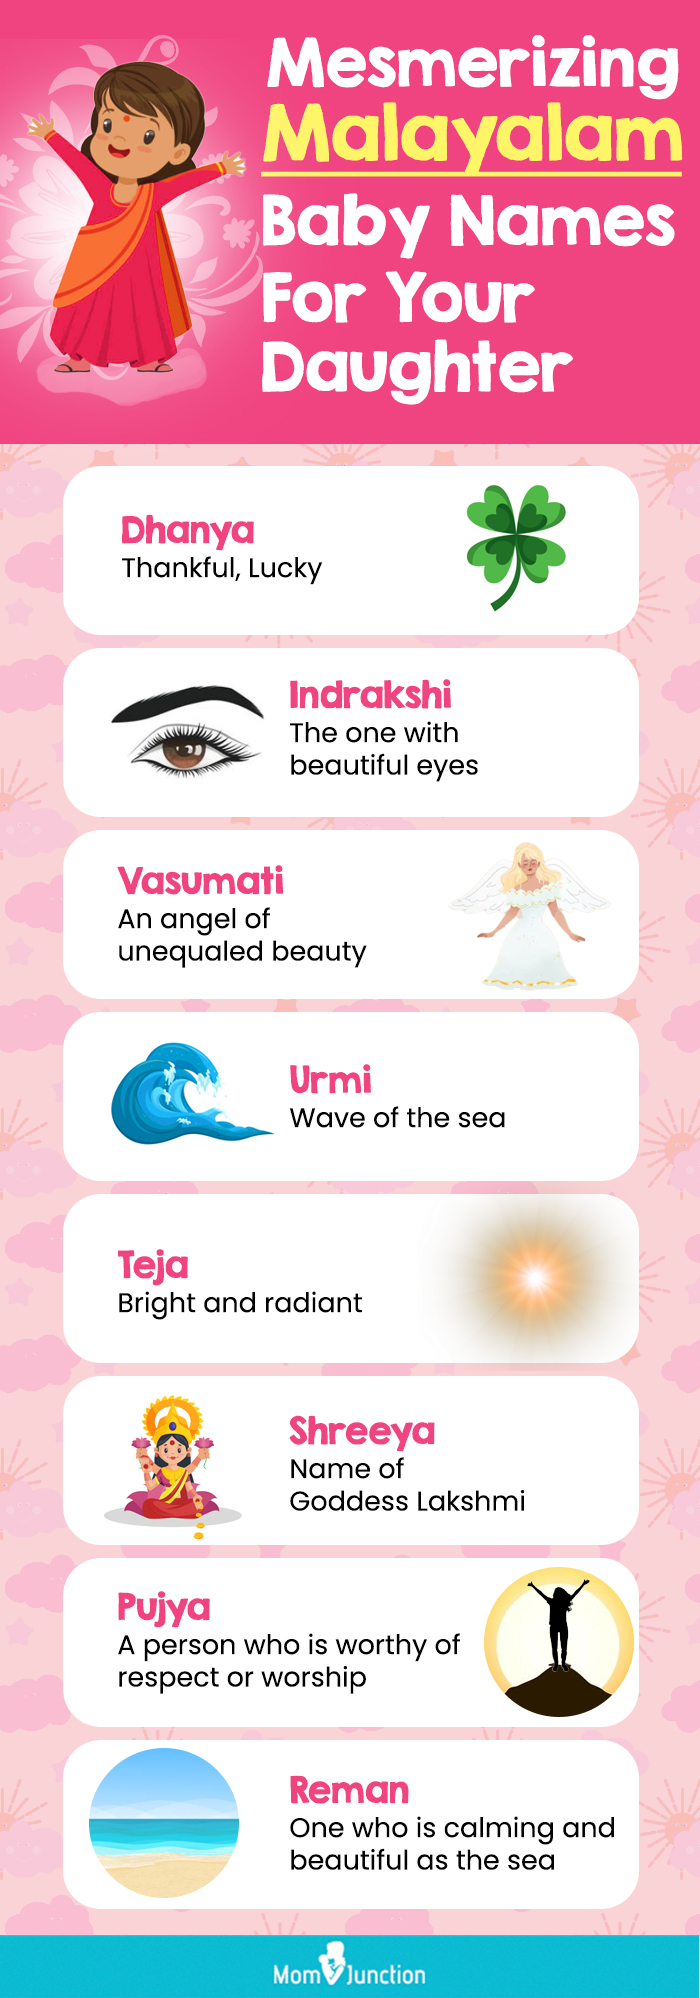 mesmerizing malayalam baby names for your daughter (infographic)